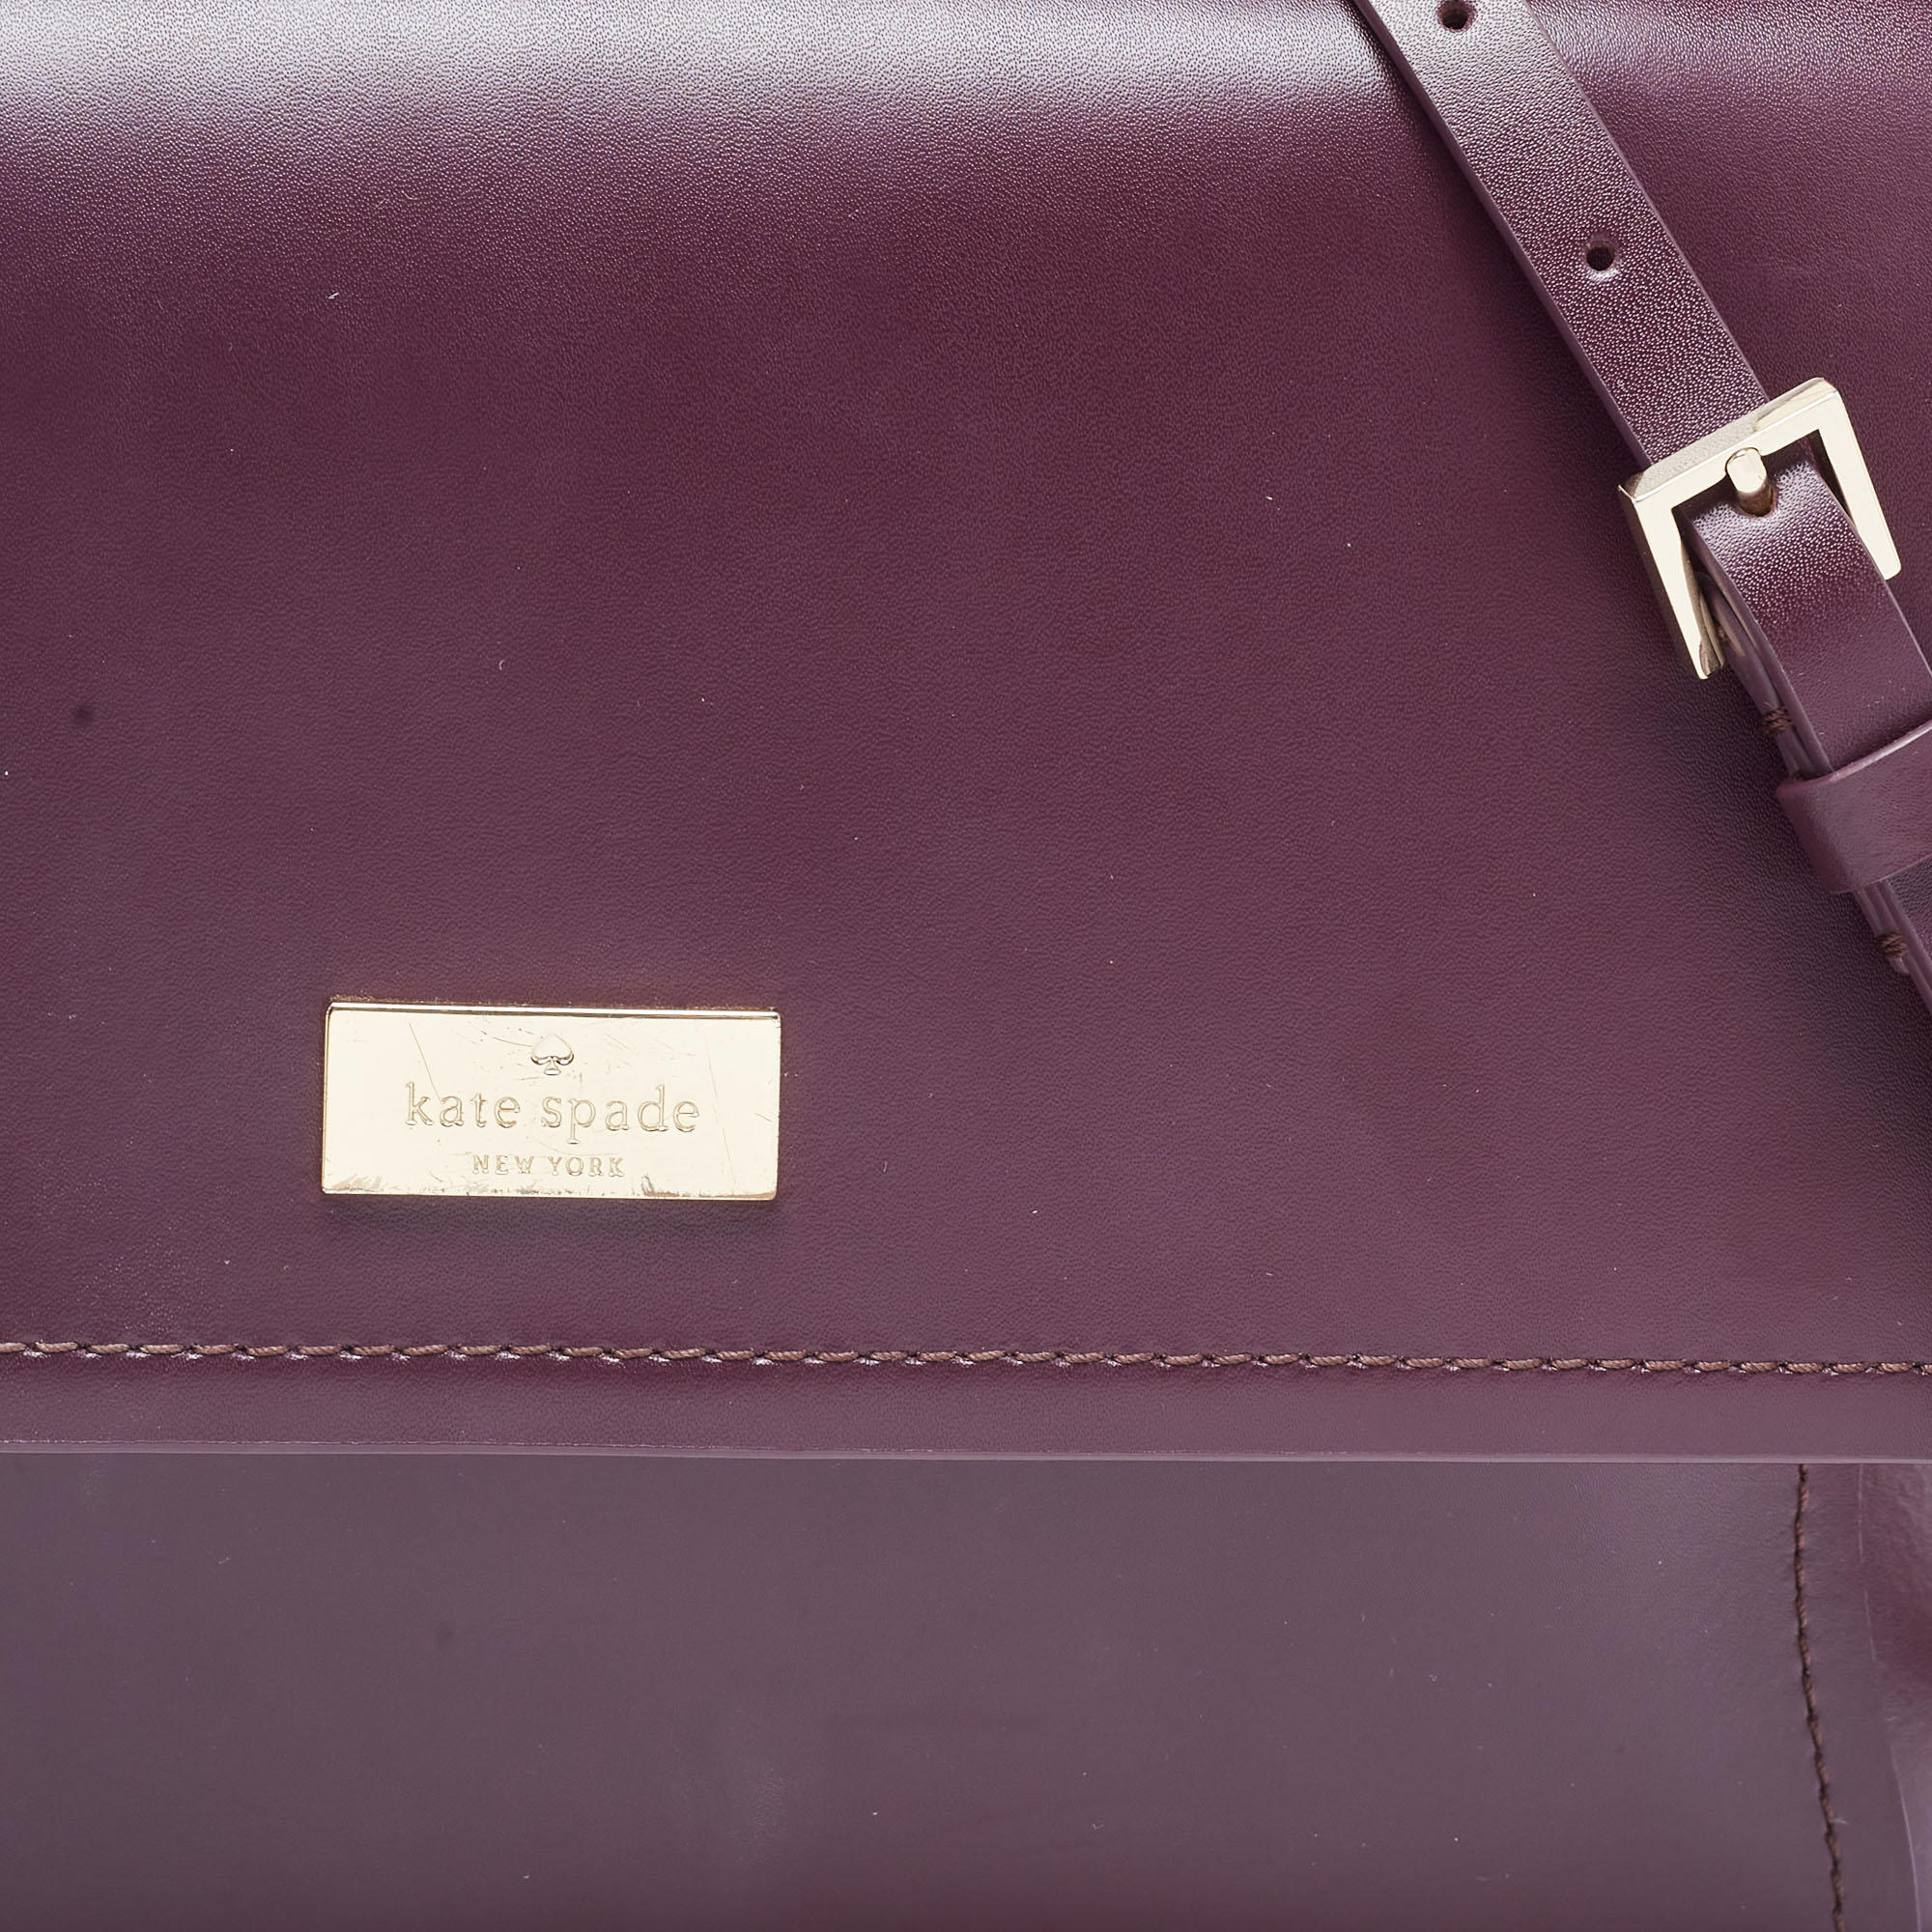 Kate Spade Purple Leather Large Arbour Hill Charline Top Handle Bag